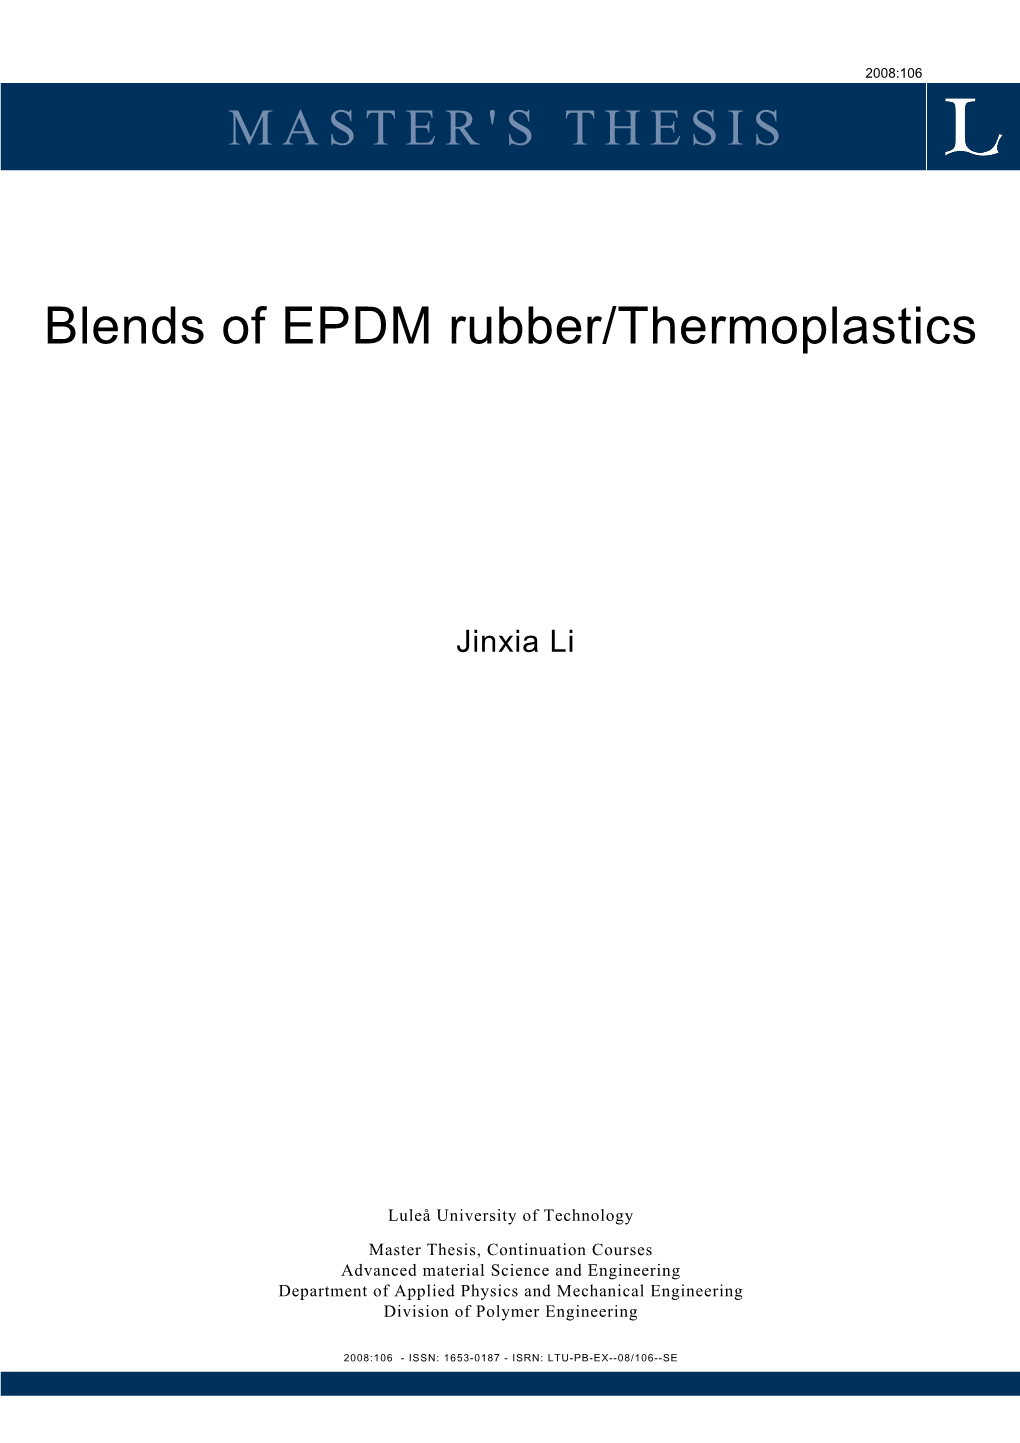 MASTER's THESIS Blends of EPDM Rubber/Thermoplastics